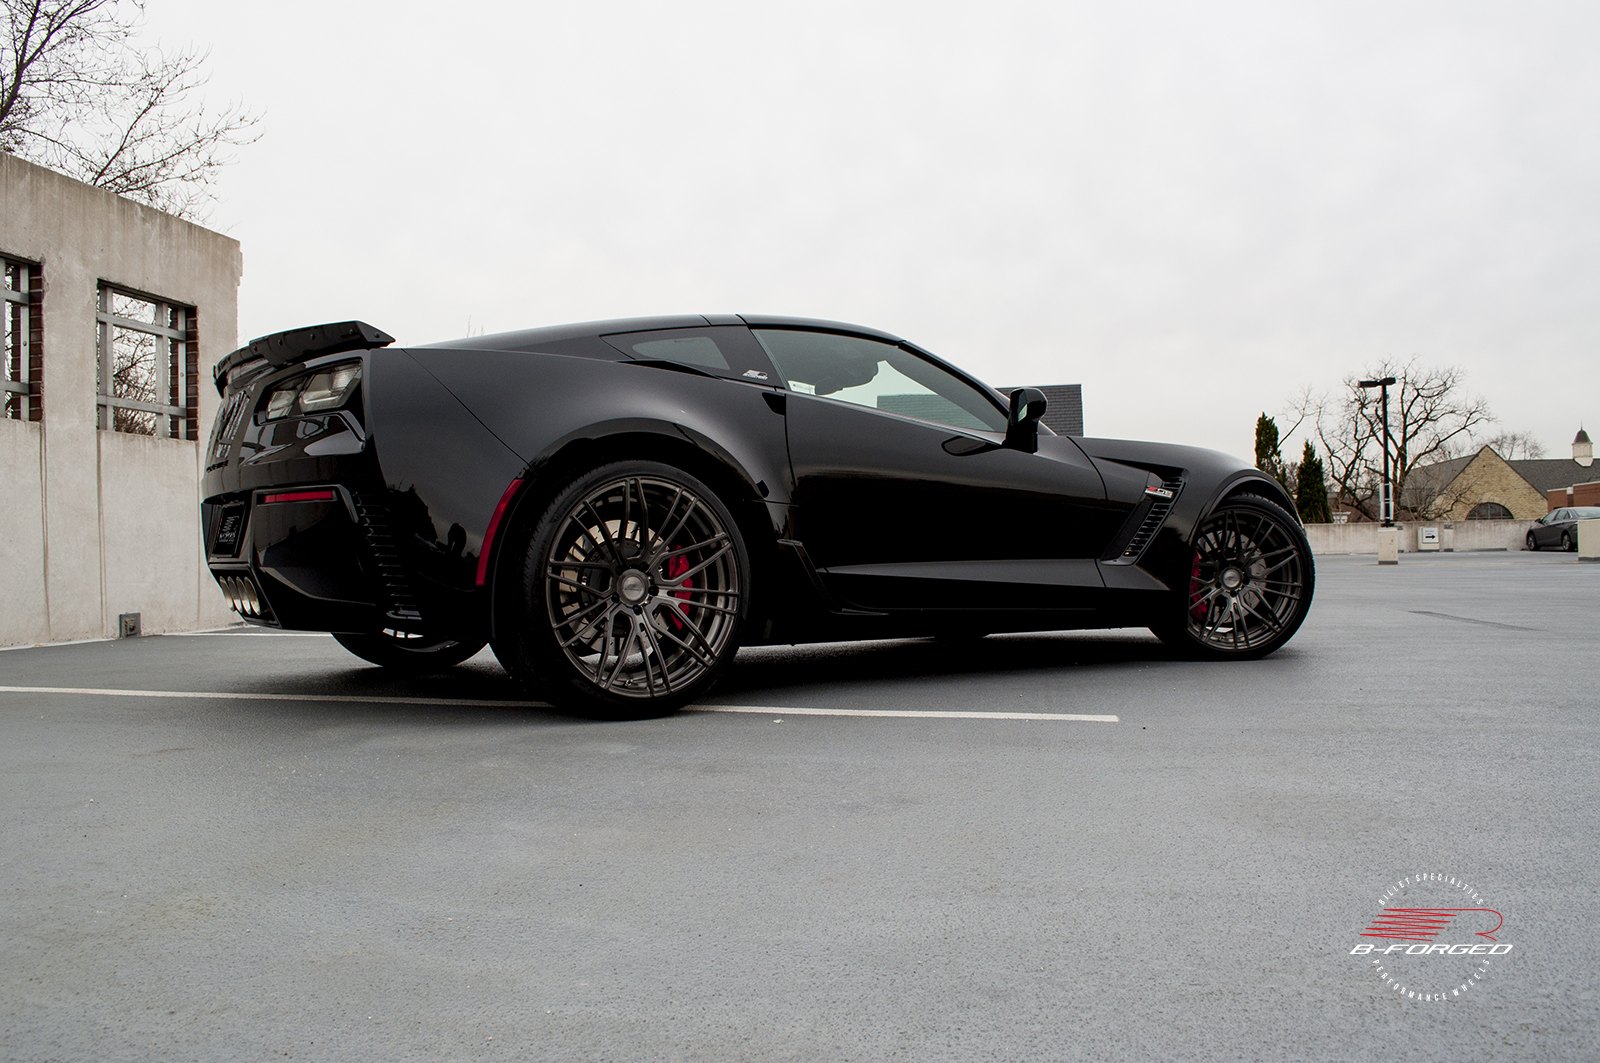 Black Chevy Corvette Z06 with Custom Style Rear Spoiler - Photo by B-Forged Performance Wheels